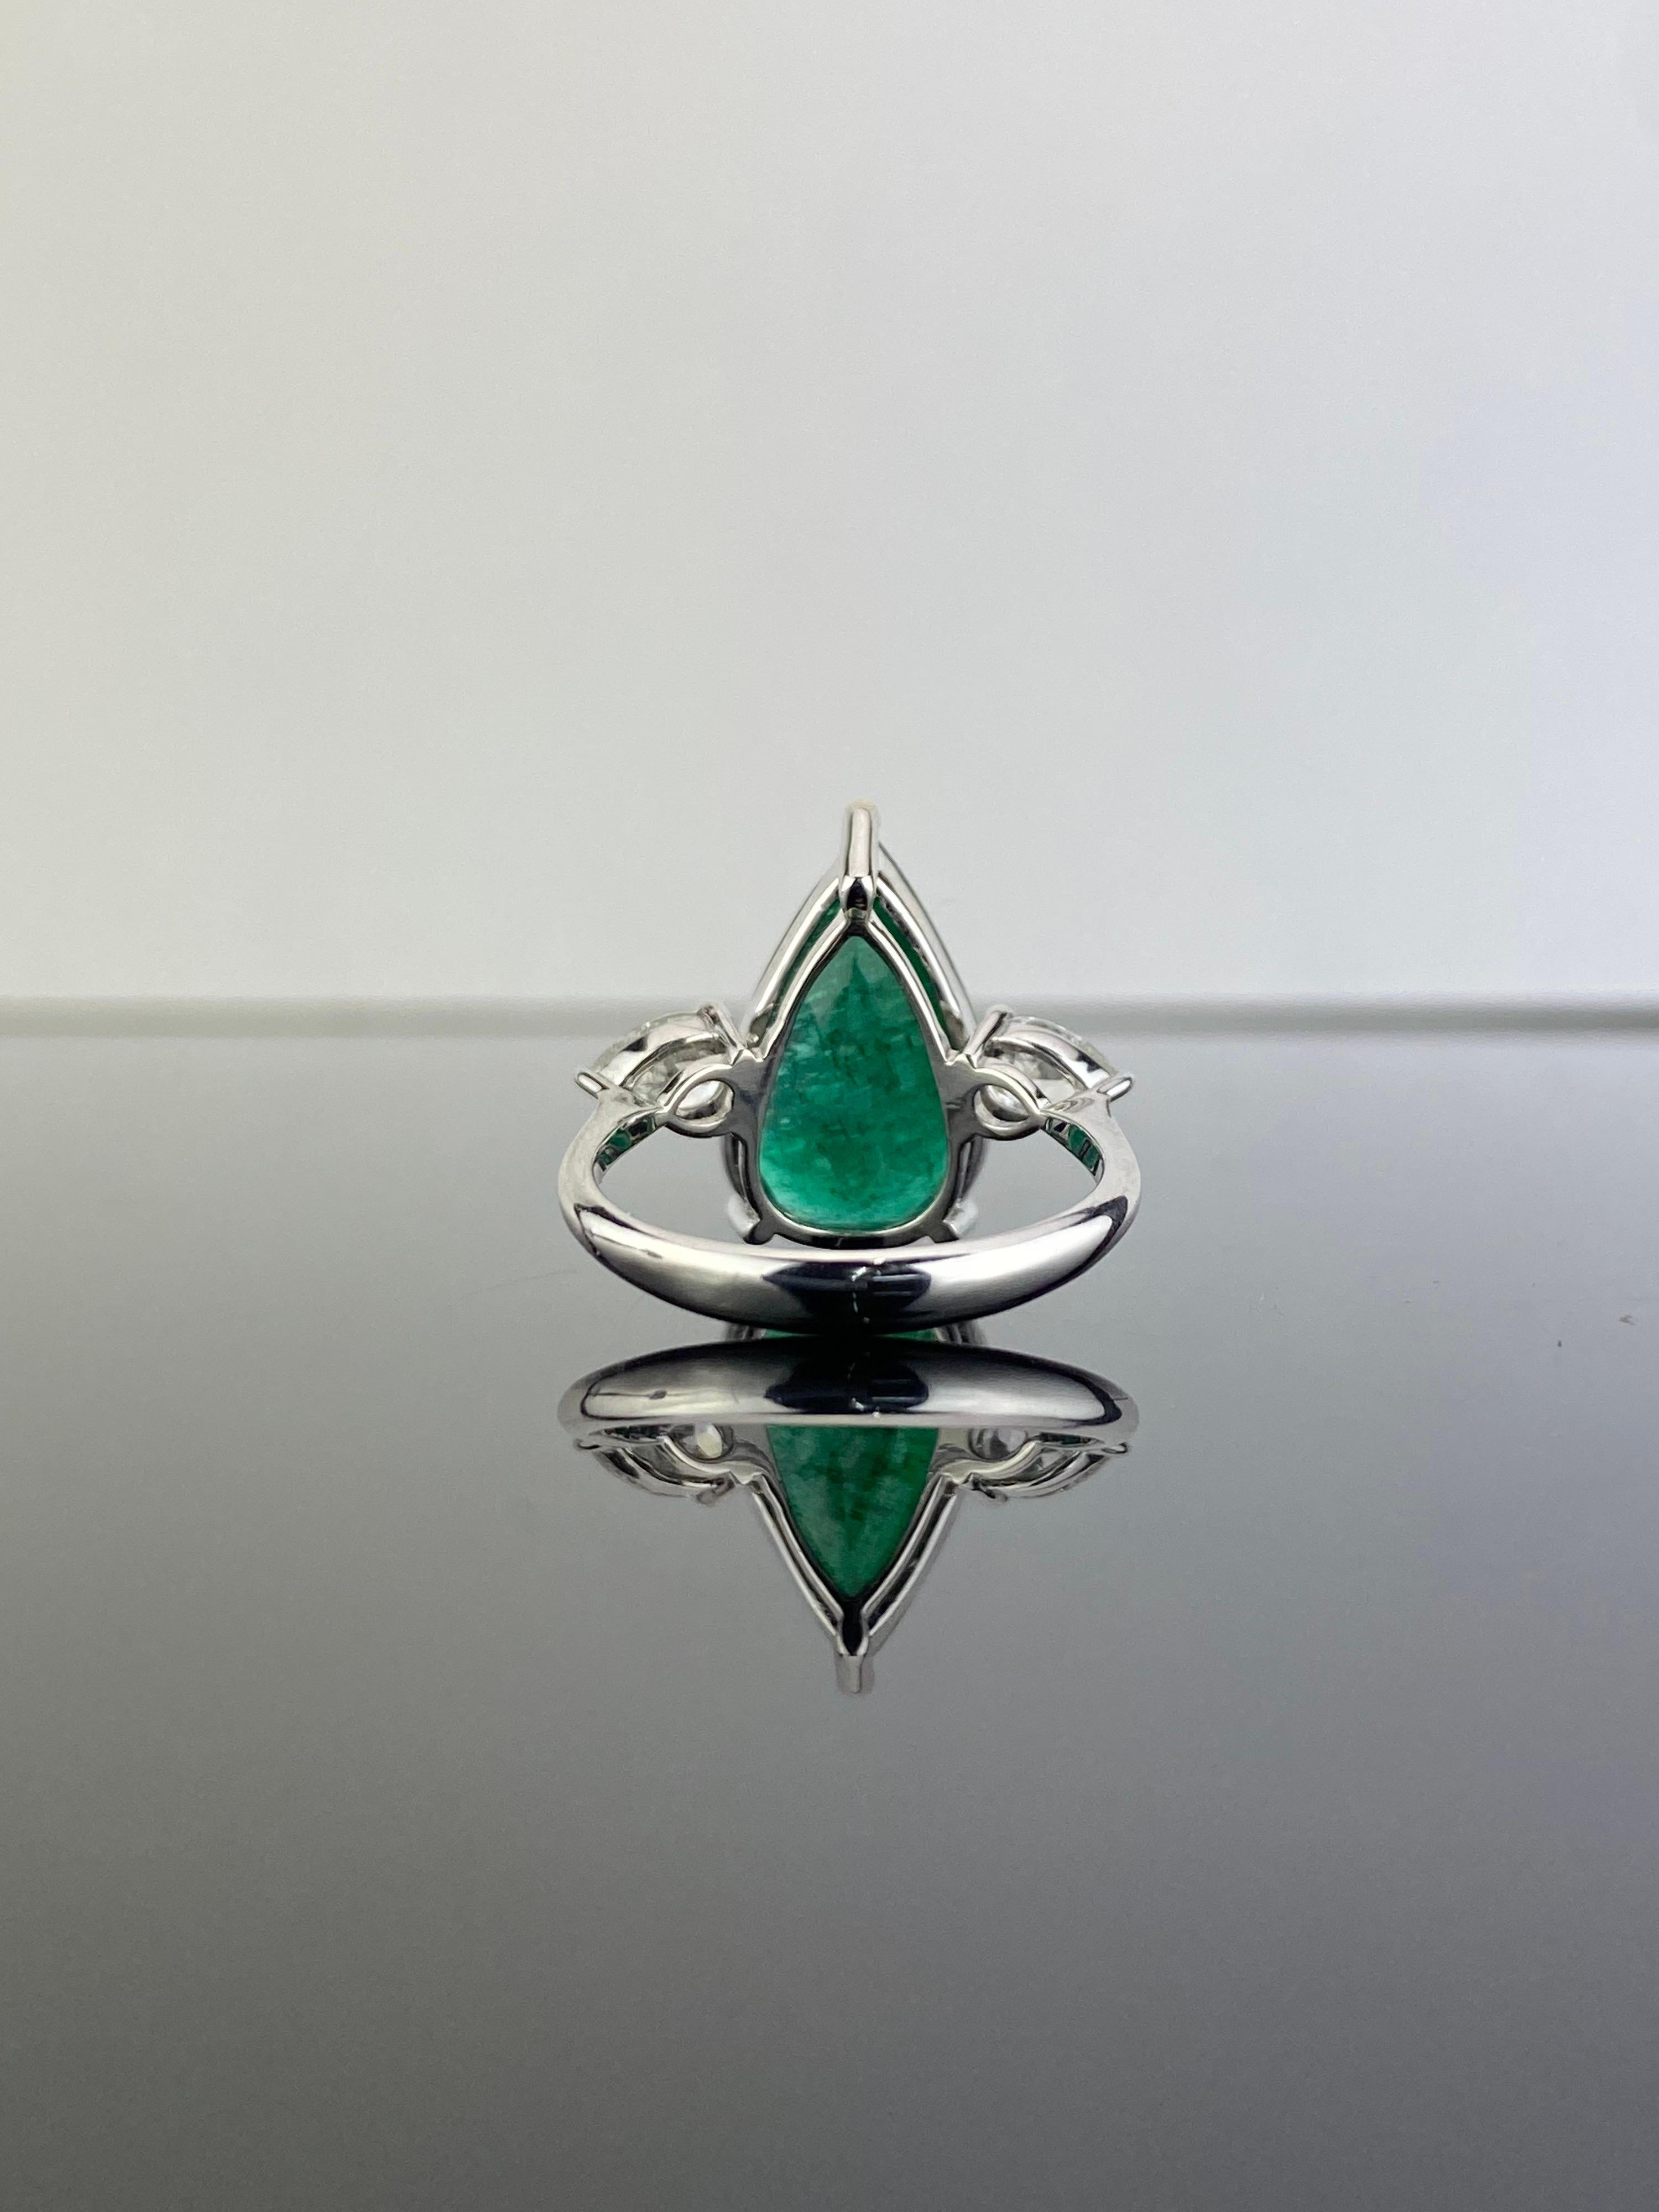 A stunning certified 5.70 carat Emerald and 0.69 carat pear shaped White Diamond three stone, engagement ring. The centre stone is a Zambian Emerald, transparent with a beautiful vivid green color and amazing luster. This ring is set in solid 18K